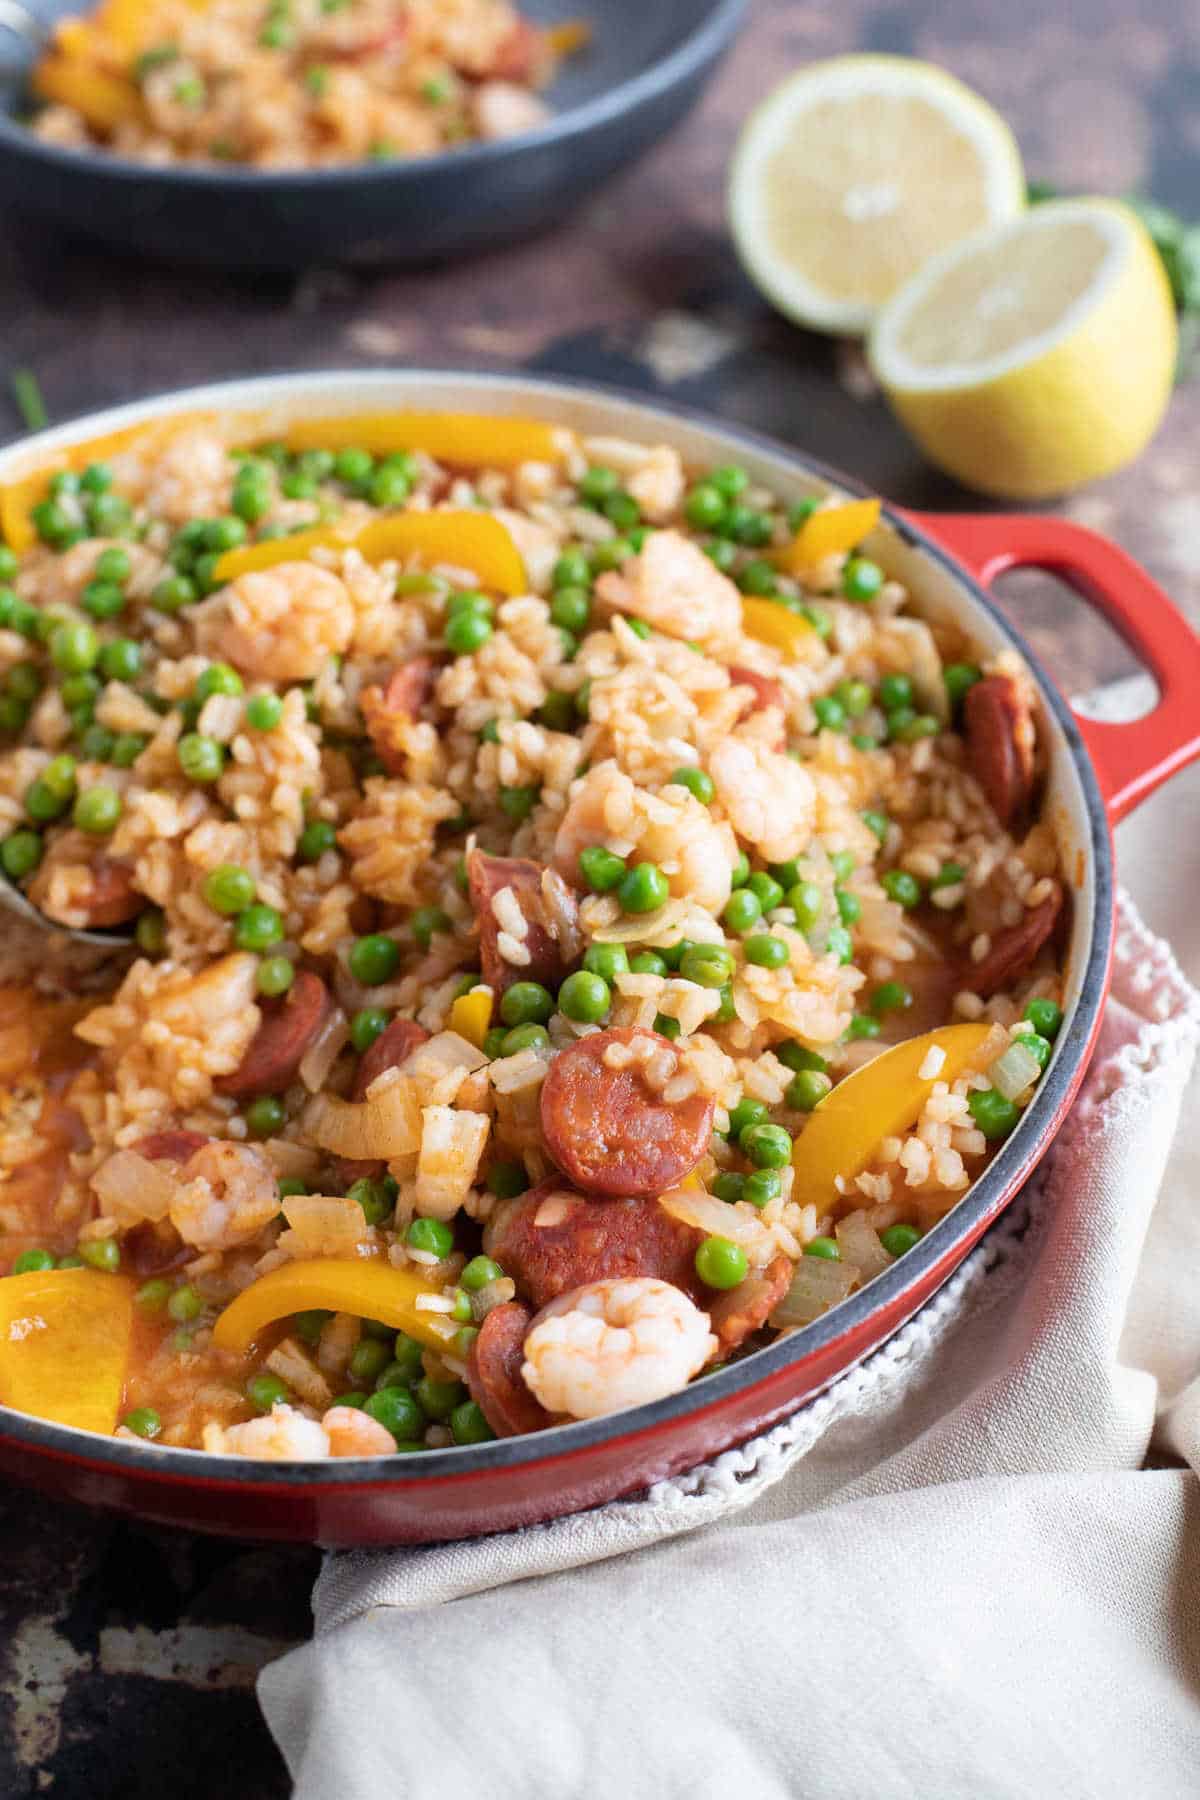 Paella with lemon wedges in the background.